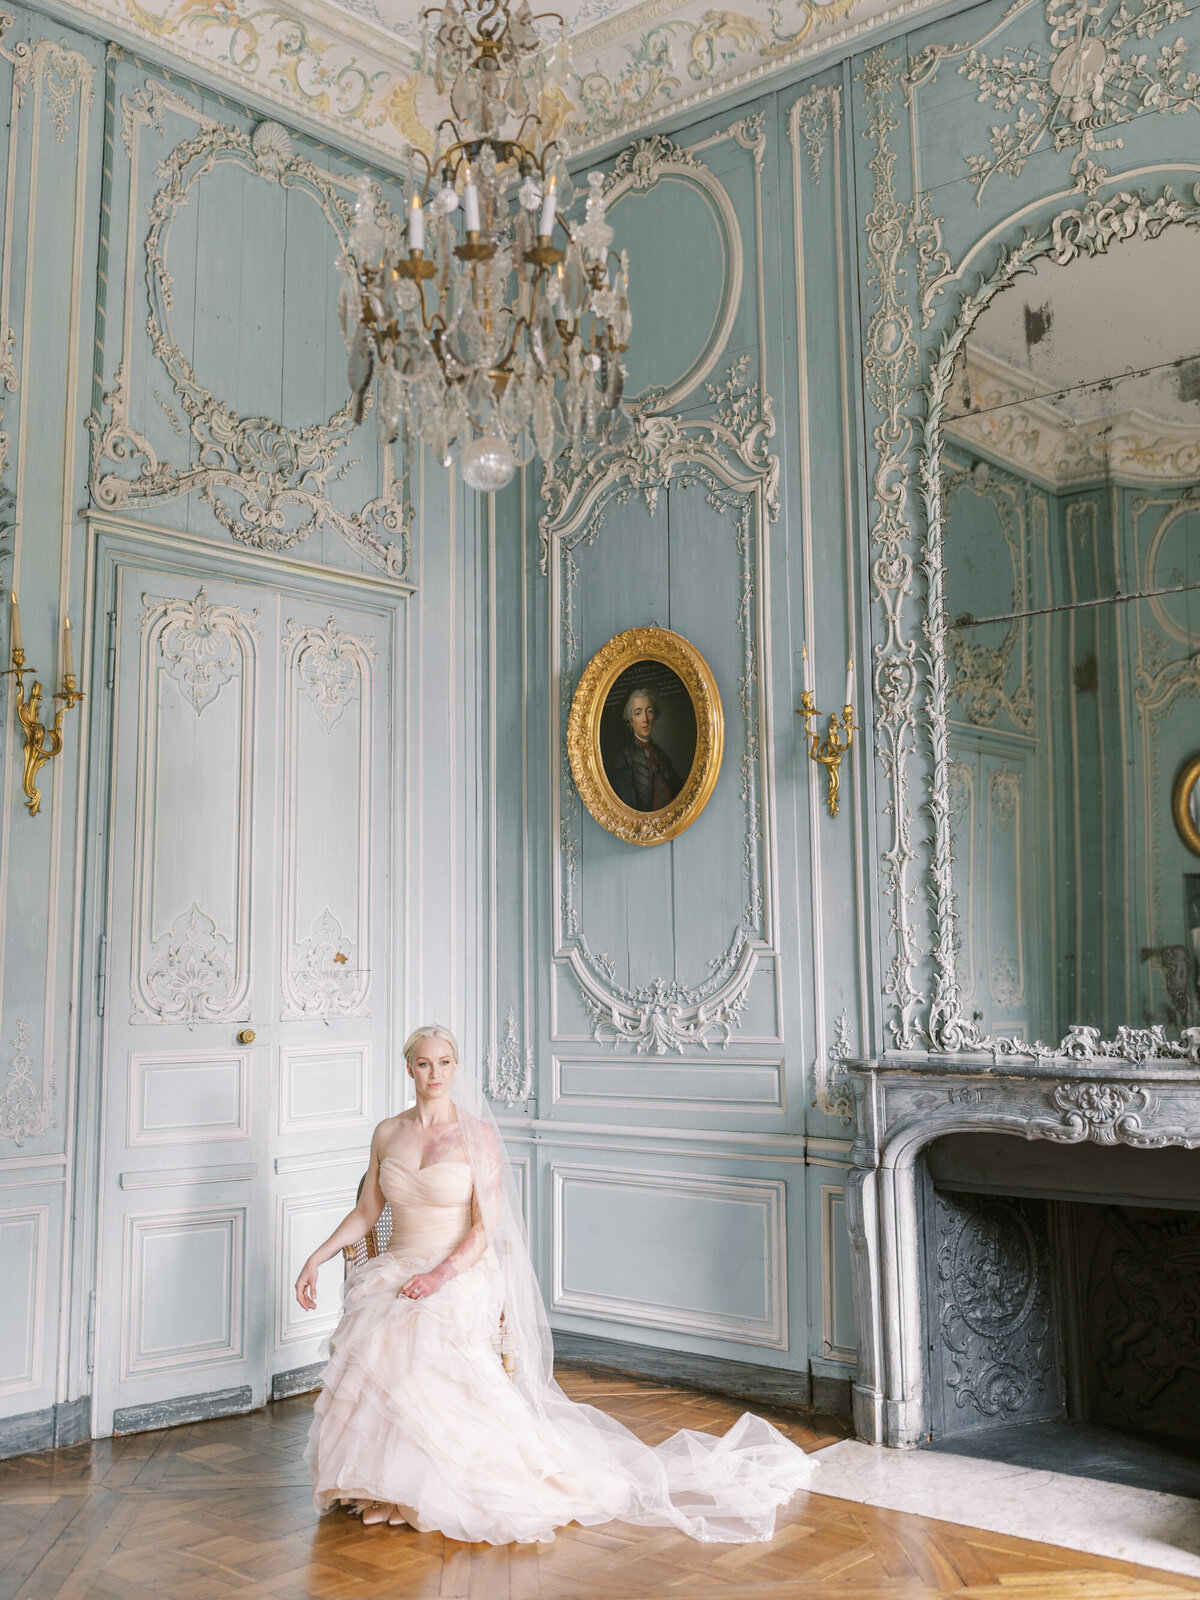 Jennifer Fox Weddings English speaking wedding planning & design agency in France crafting refined and bespoke weddings and celebrations Provence, Paris and destination Laurel-Chris-Chateau-de-Champlatreaux-Molly-Carr-Photography-38